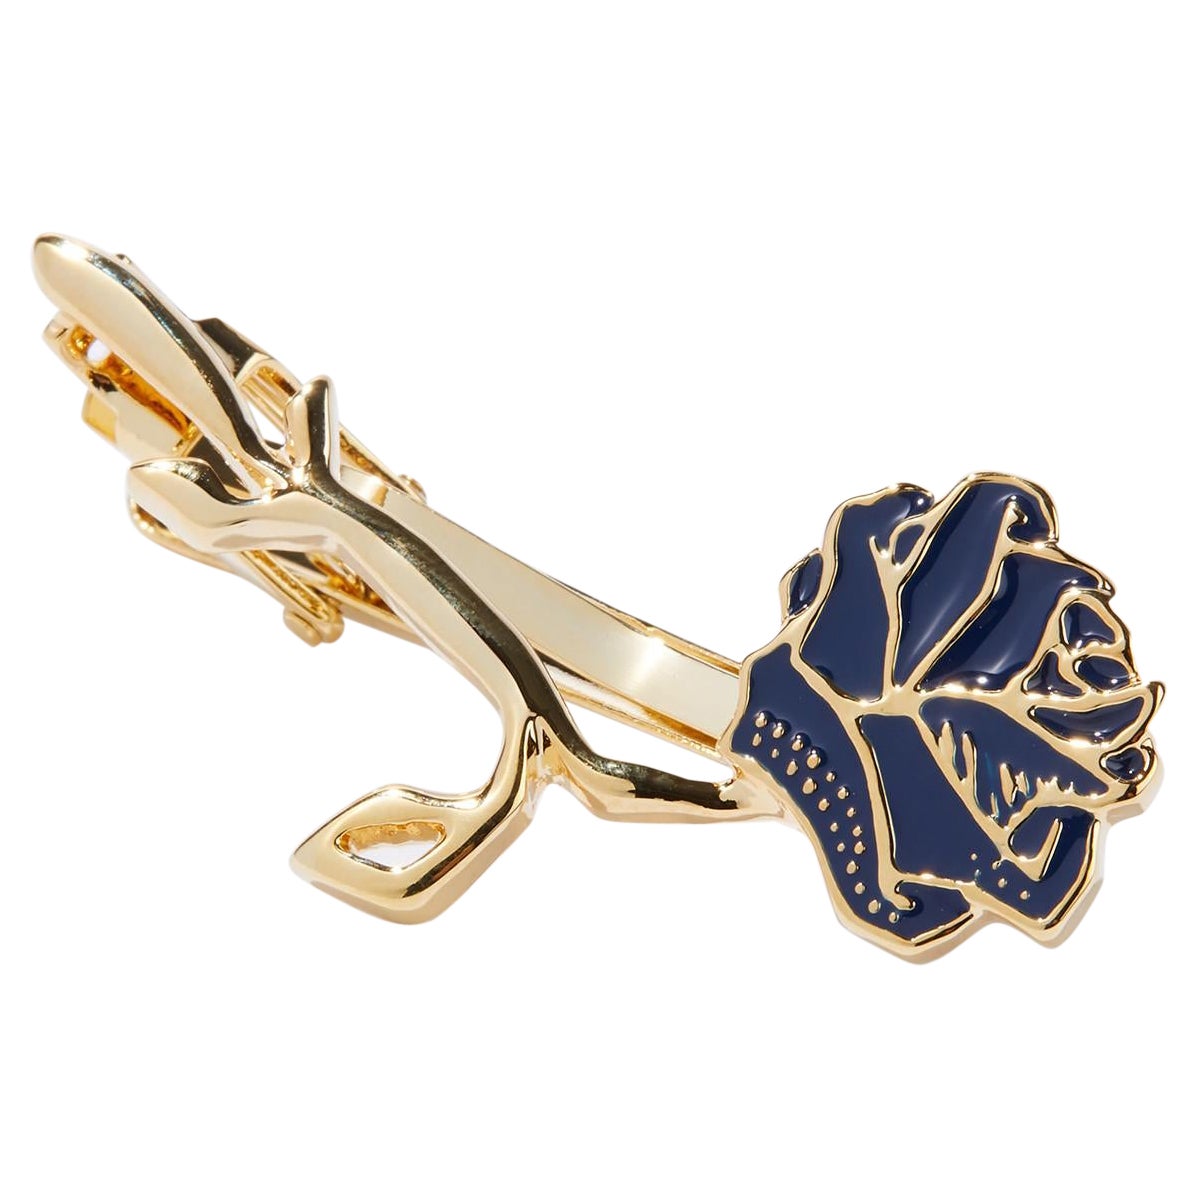 Blue Velvet, Glossy Lacquer Finish Tie Clip Dipped in 24k Gold For Sale